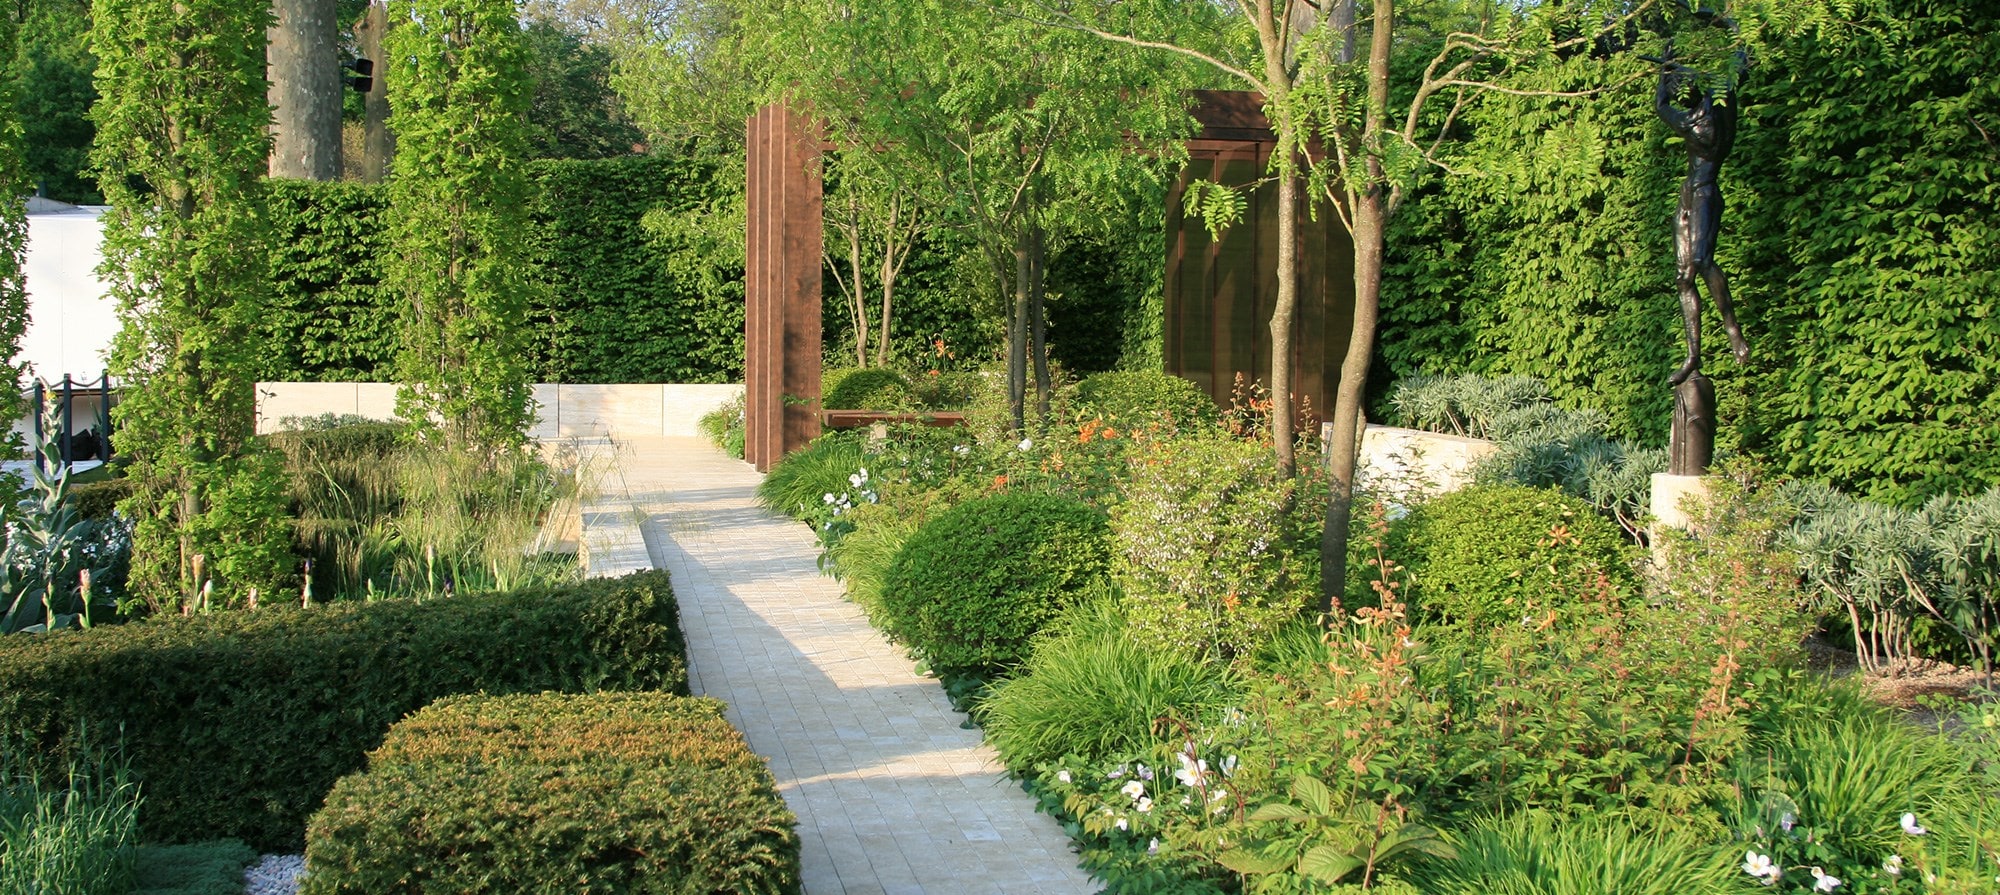 The Laurent-Perrier Garden designed by Ulf Nordfjell